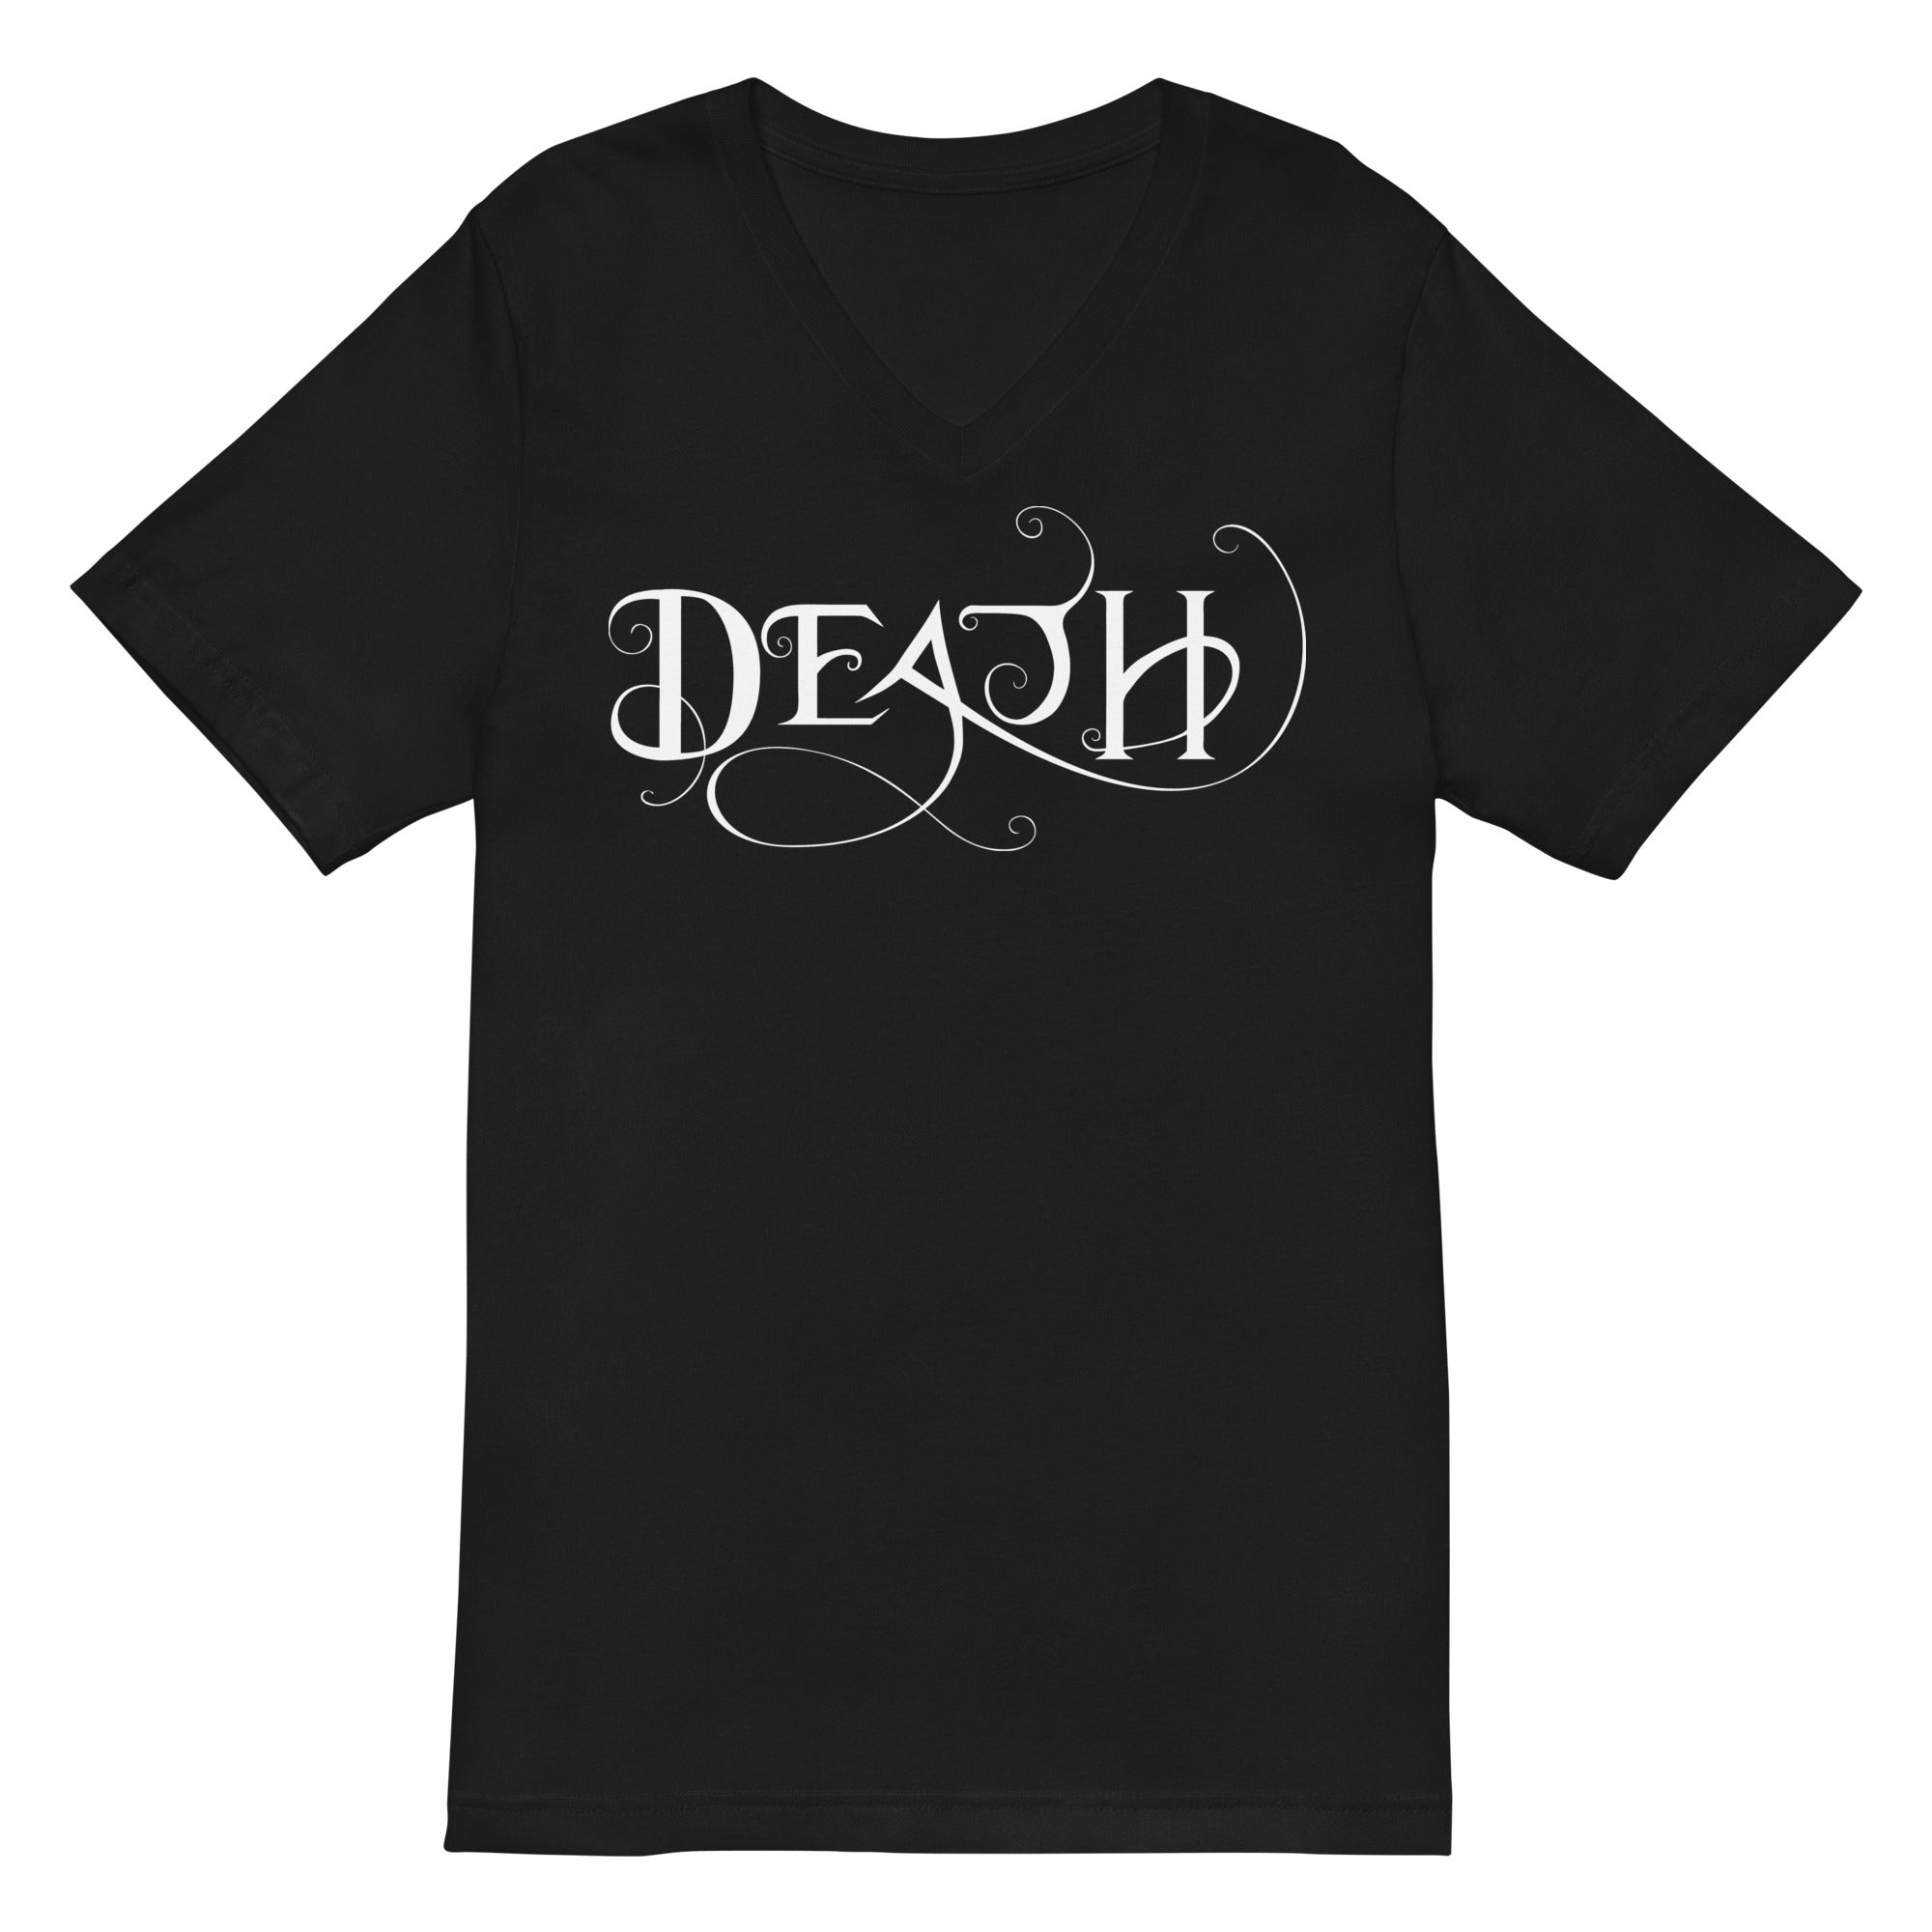 Death - The Grim Reaper Gothic Deathrock Style Women’s Short Sleeve V-Neck T-Shirt - Edge of Life Designs